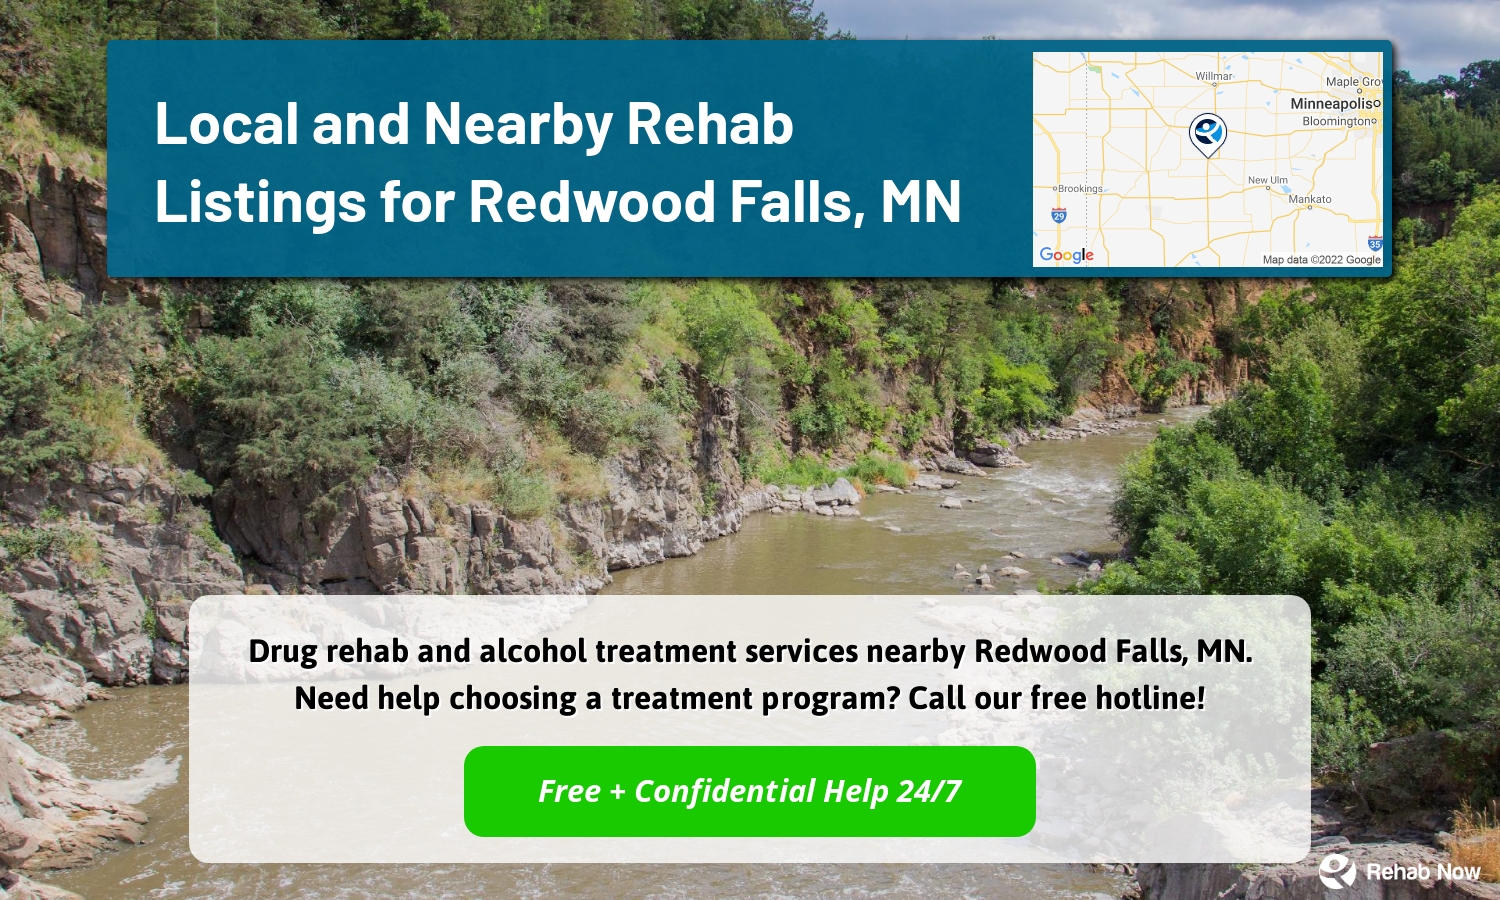 Drug rehab and alcohol treatment services nearby Redwood Falls, MN. Need help choosing a treatment program? Call our free hotline!